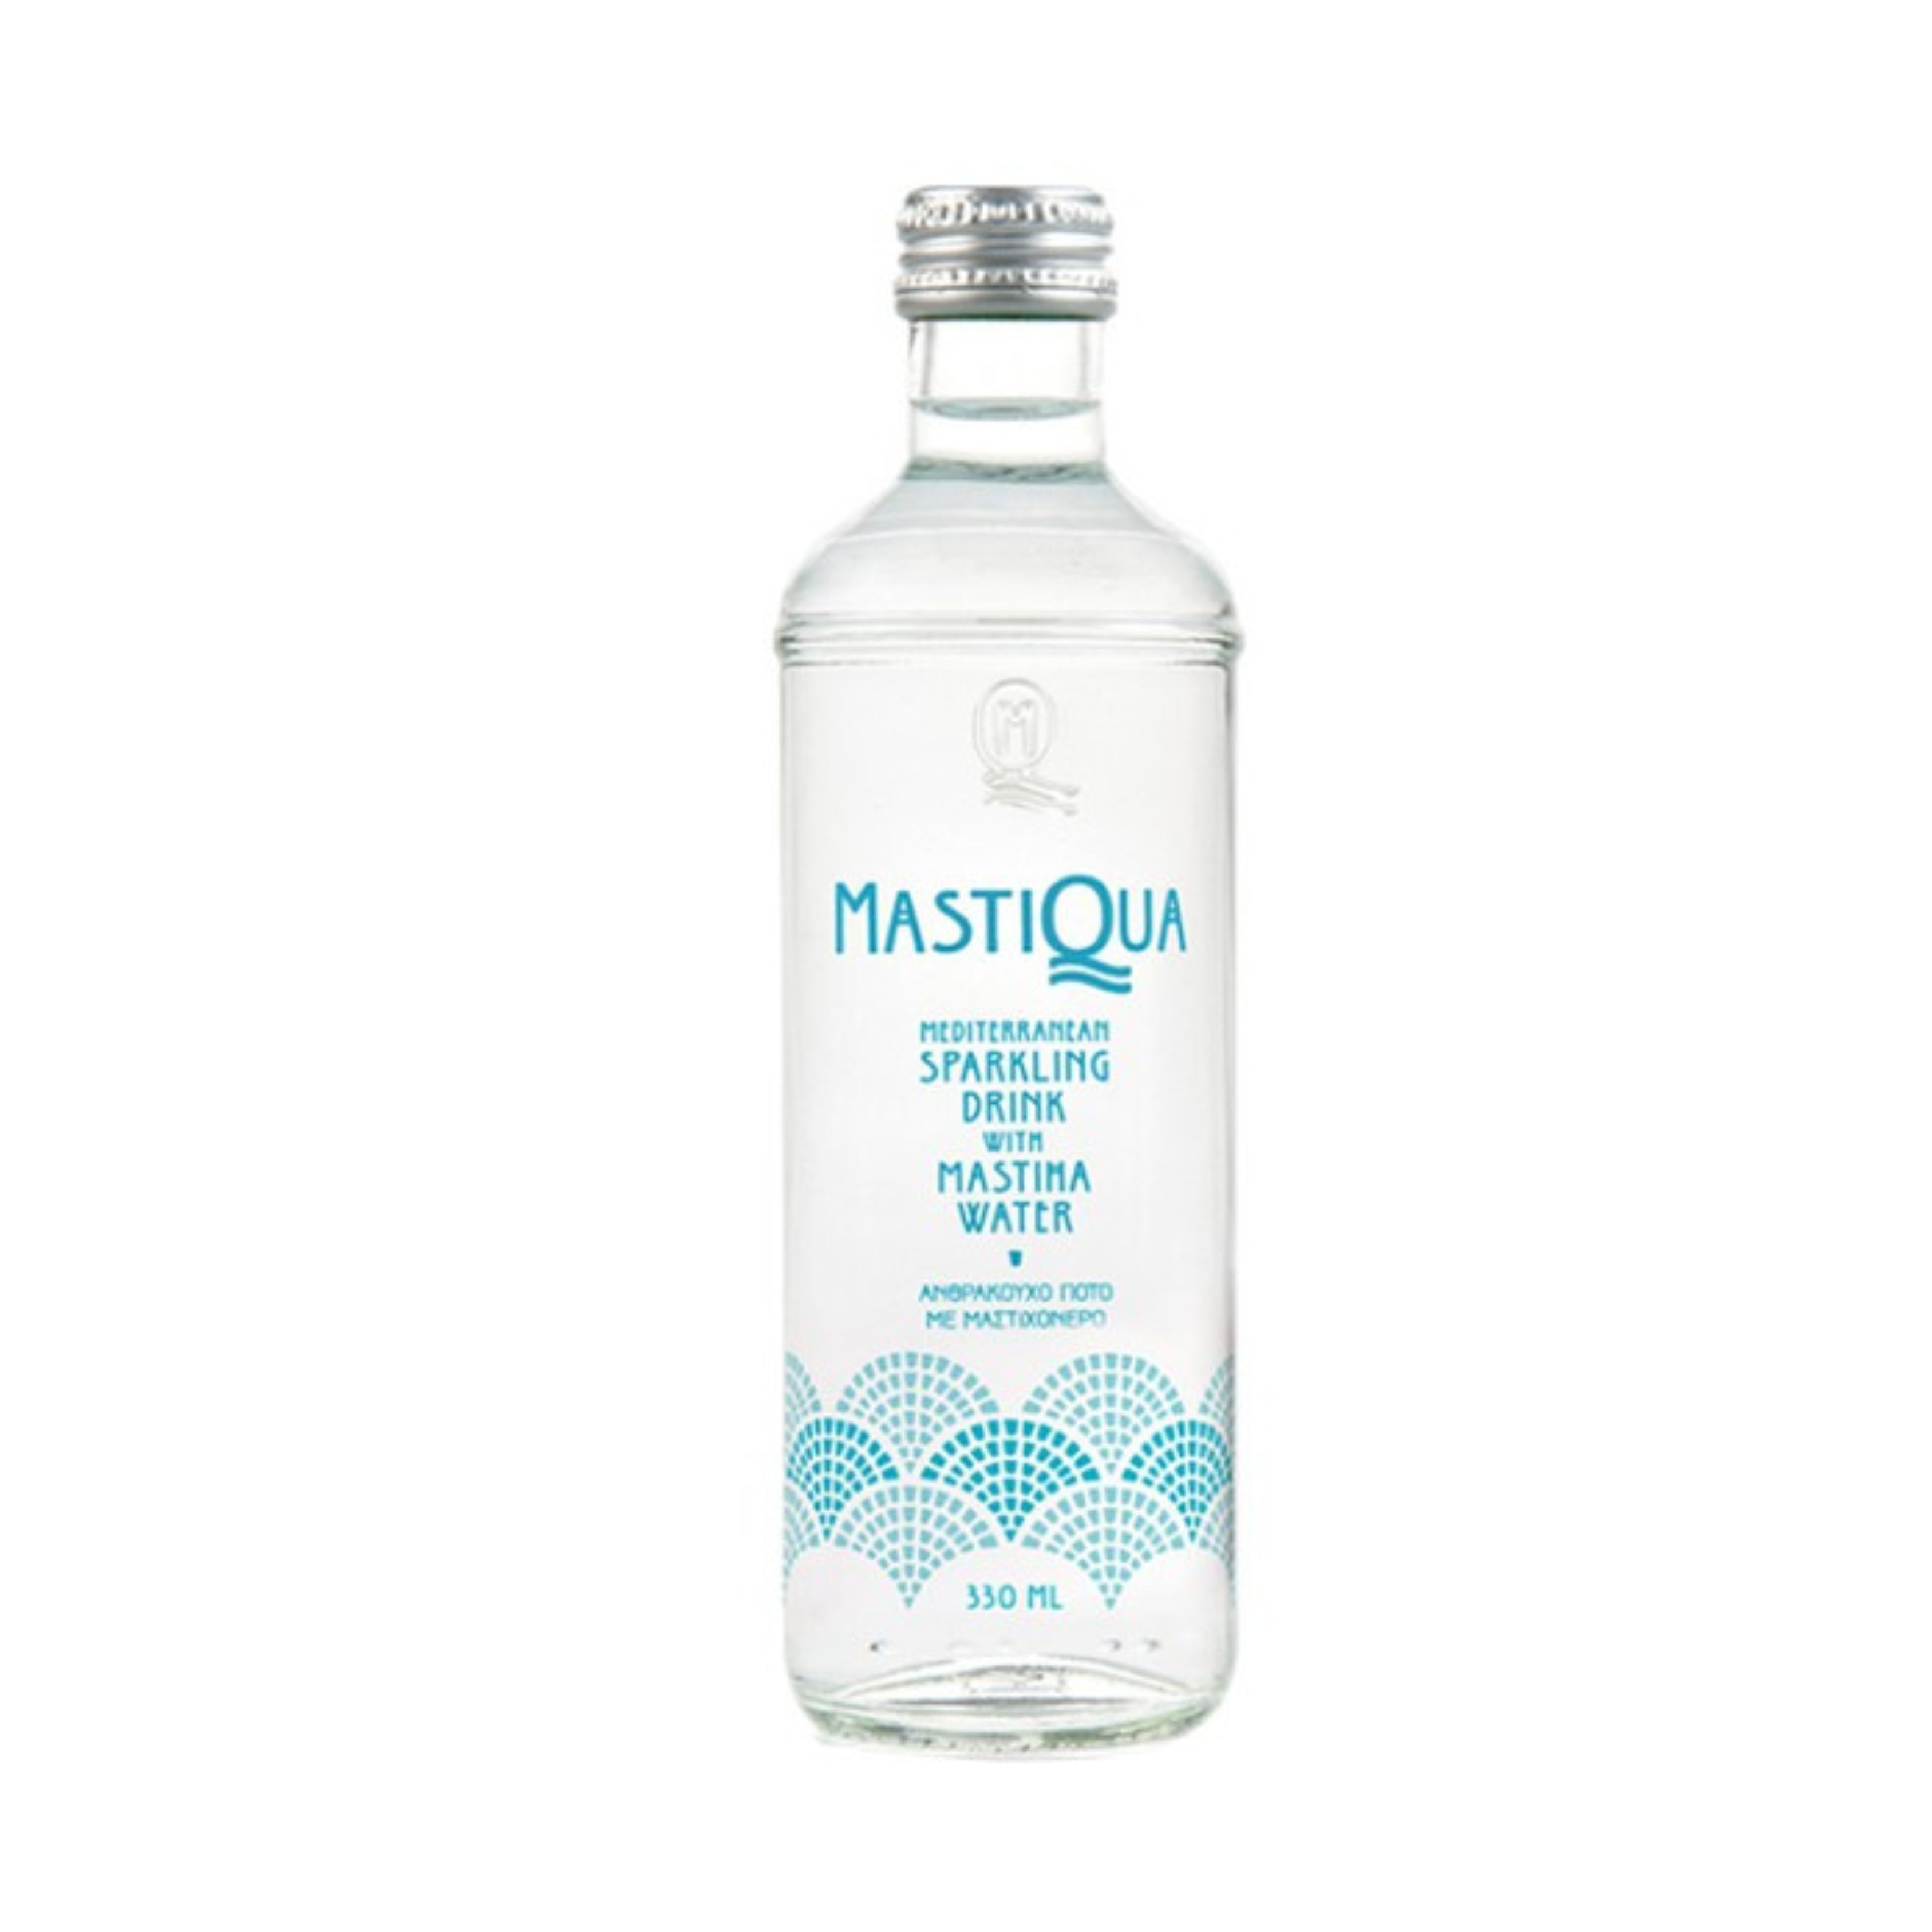 Pure carbonated water with mastic - 330ml